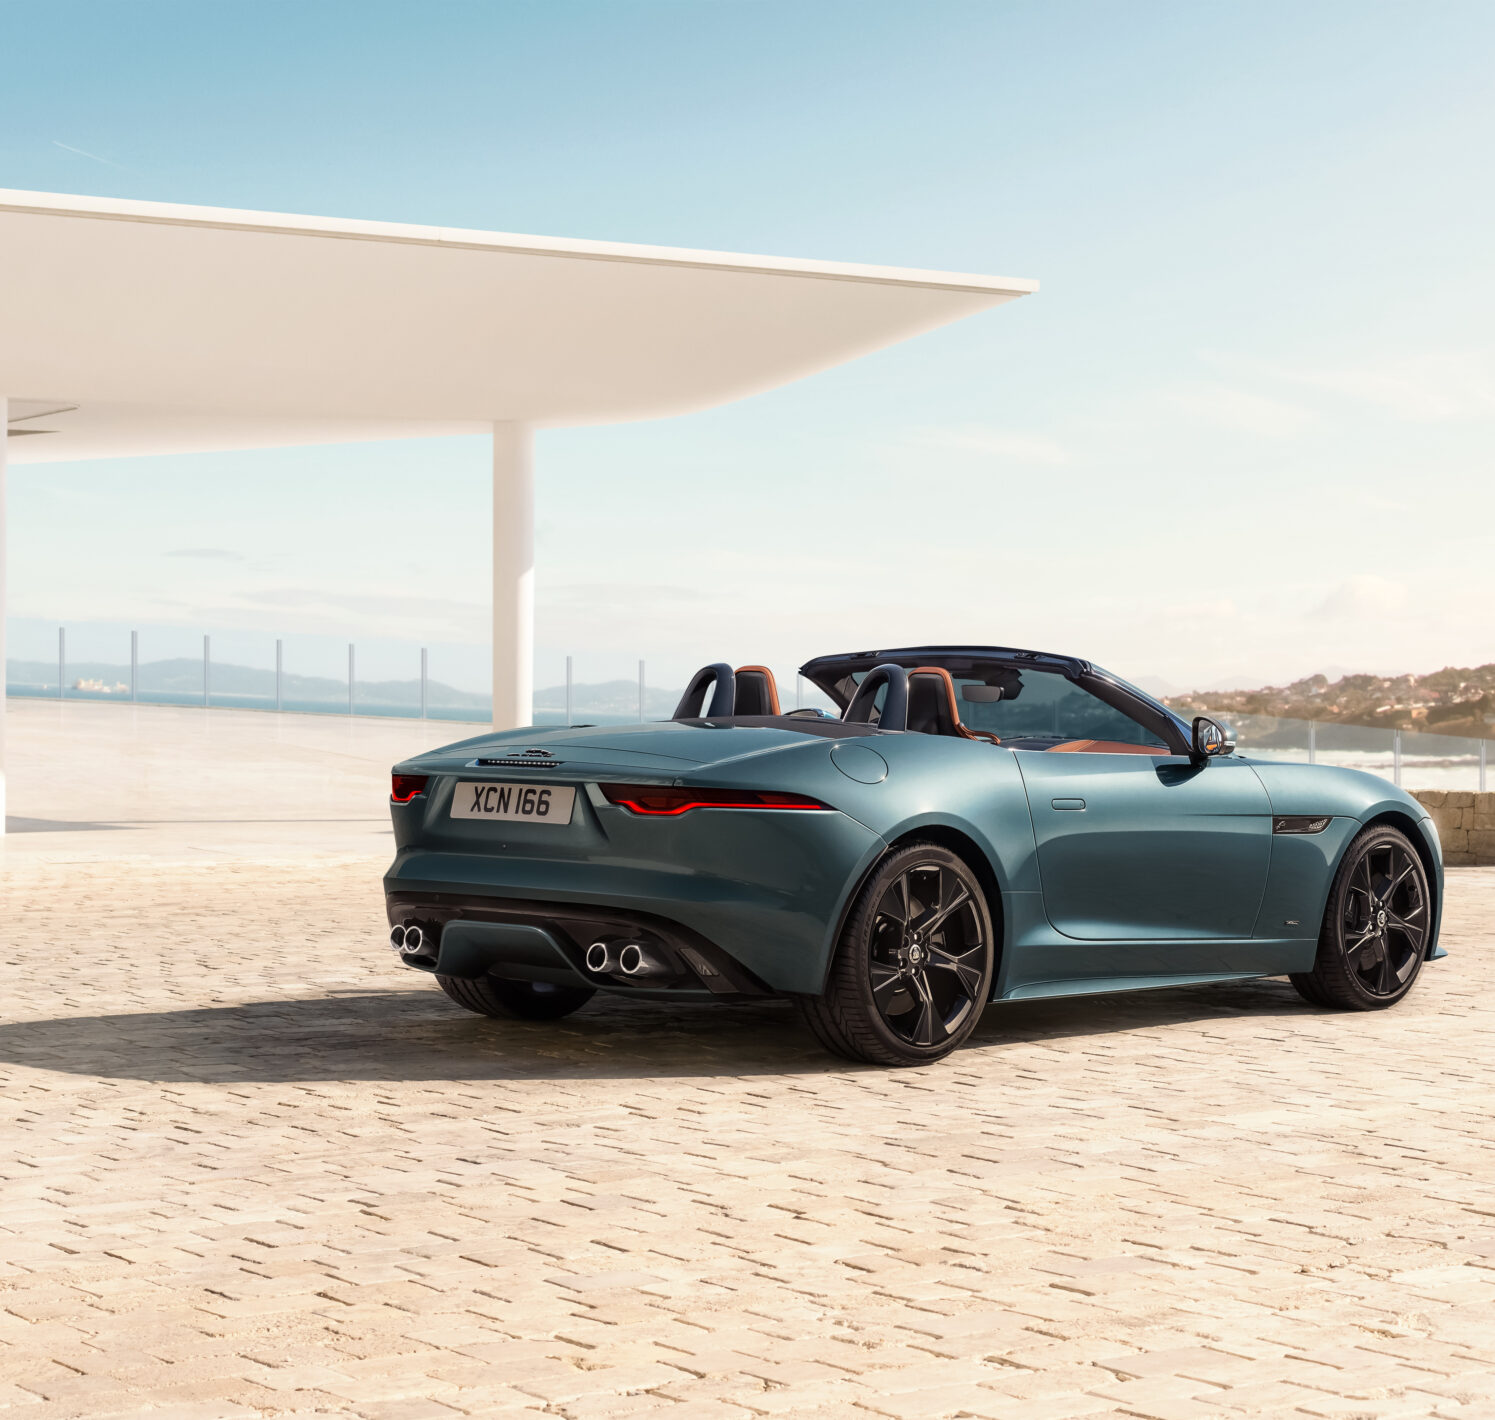 https://autofilter.sk/assets/images/f-type/gallery/Jag_F-TYPE_24MY_Conv_01_Exterior_Static_Rear3Qr_March_2023_01.jpg - obrazok